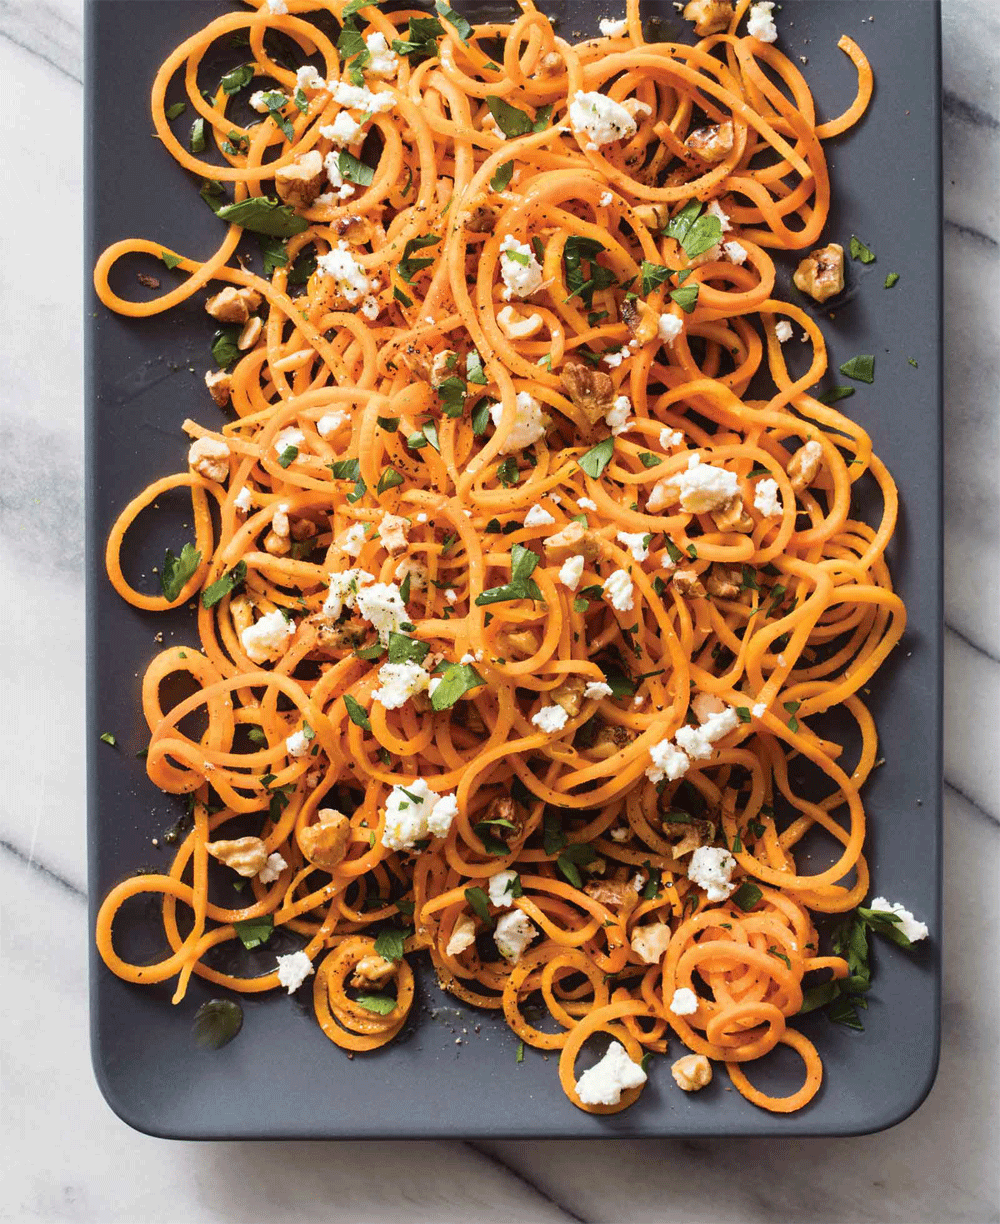 Roasted spiralized sweet potatoes with walnuts and feta recipe